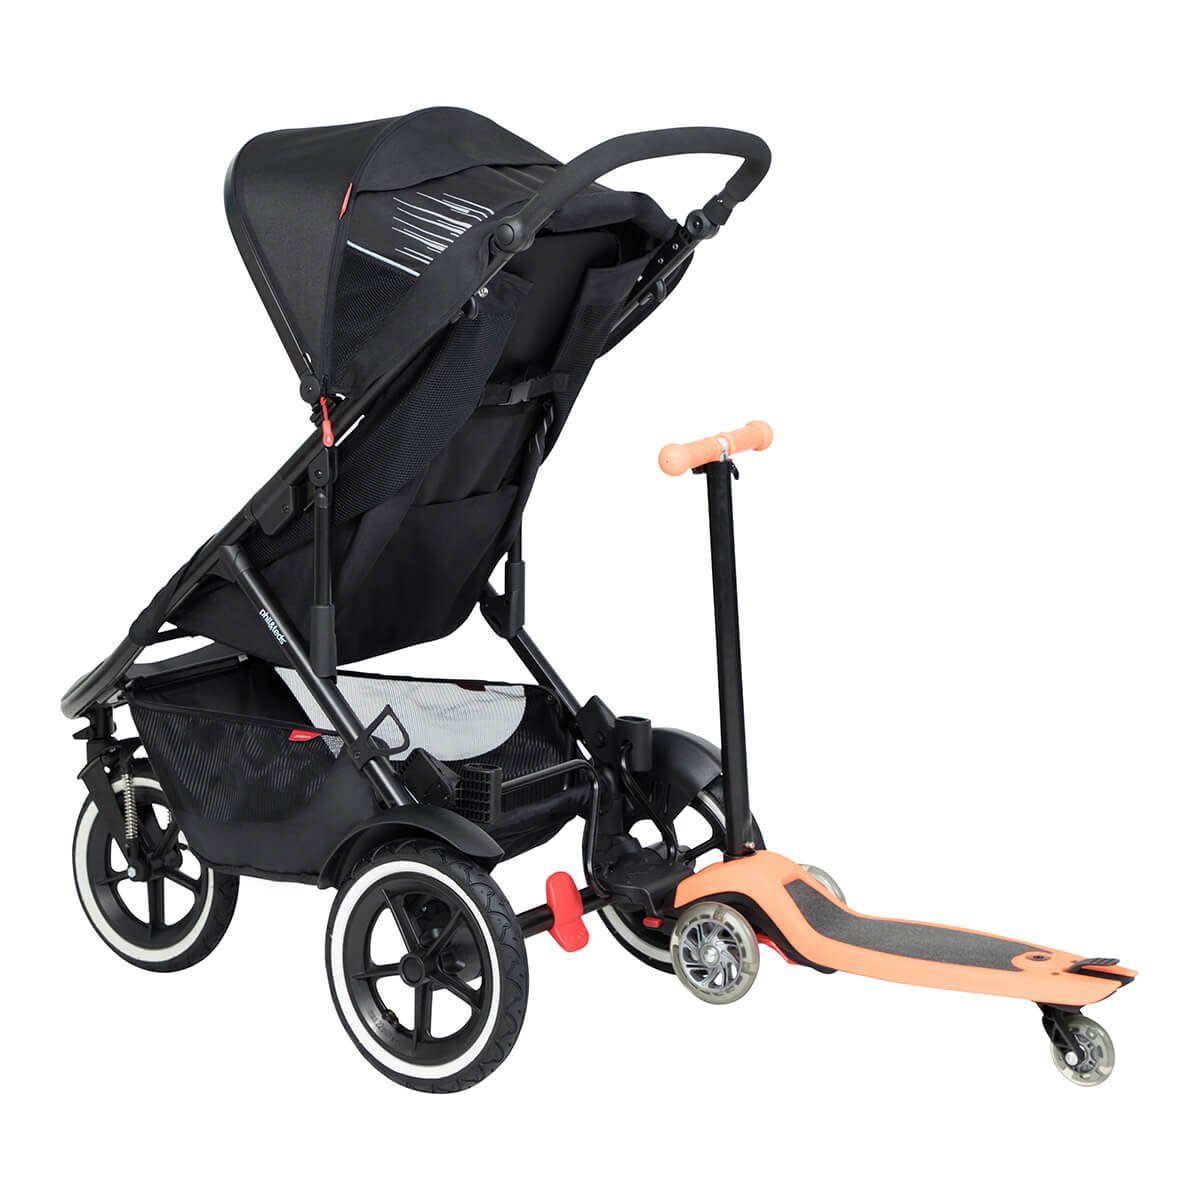 https://cdn.accentuate.io/7888305160362/19793940119722/philteds-sport-buggy-with-freerider-stroller-board-in-rear-v1700691764043.jpg?1200x1200